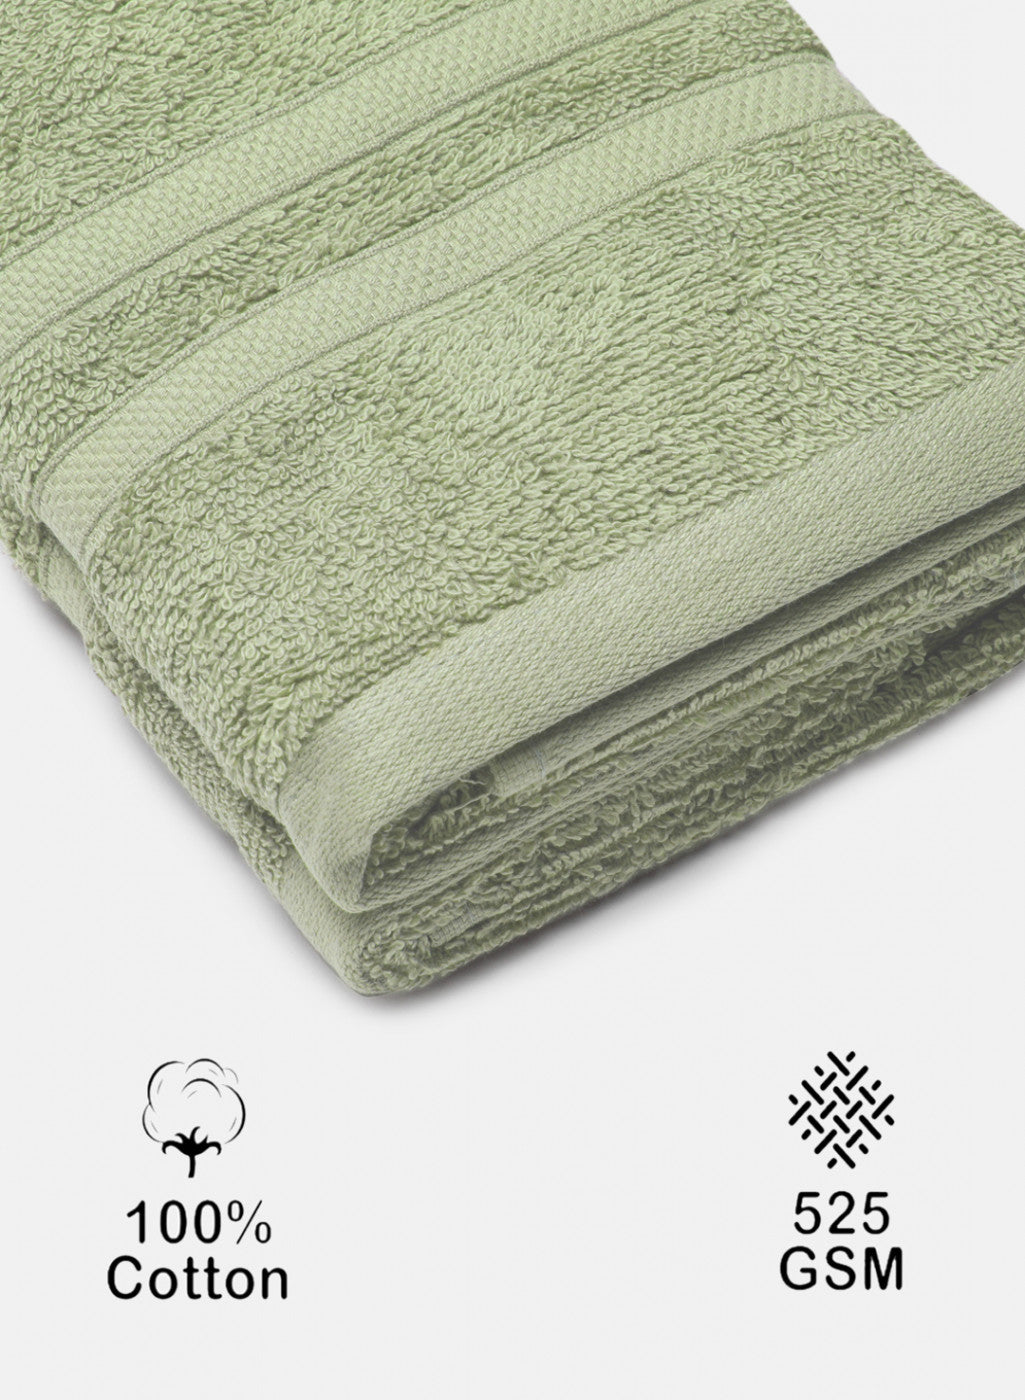 Green Cotton 525 GSM Hand Towels (Pack of 2)